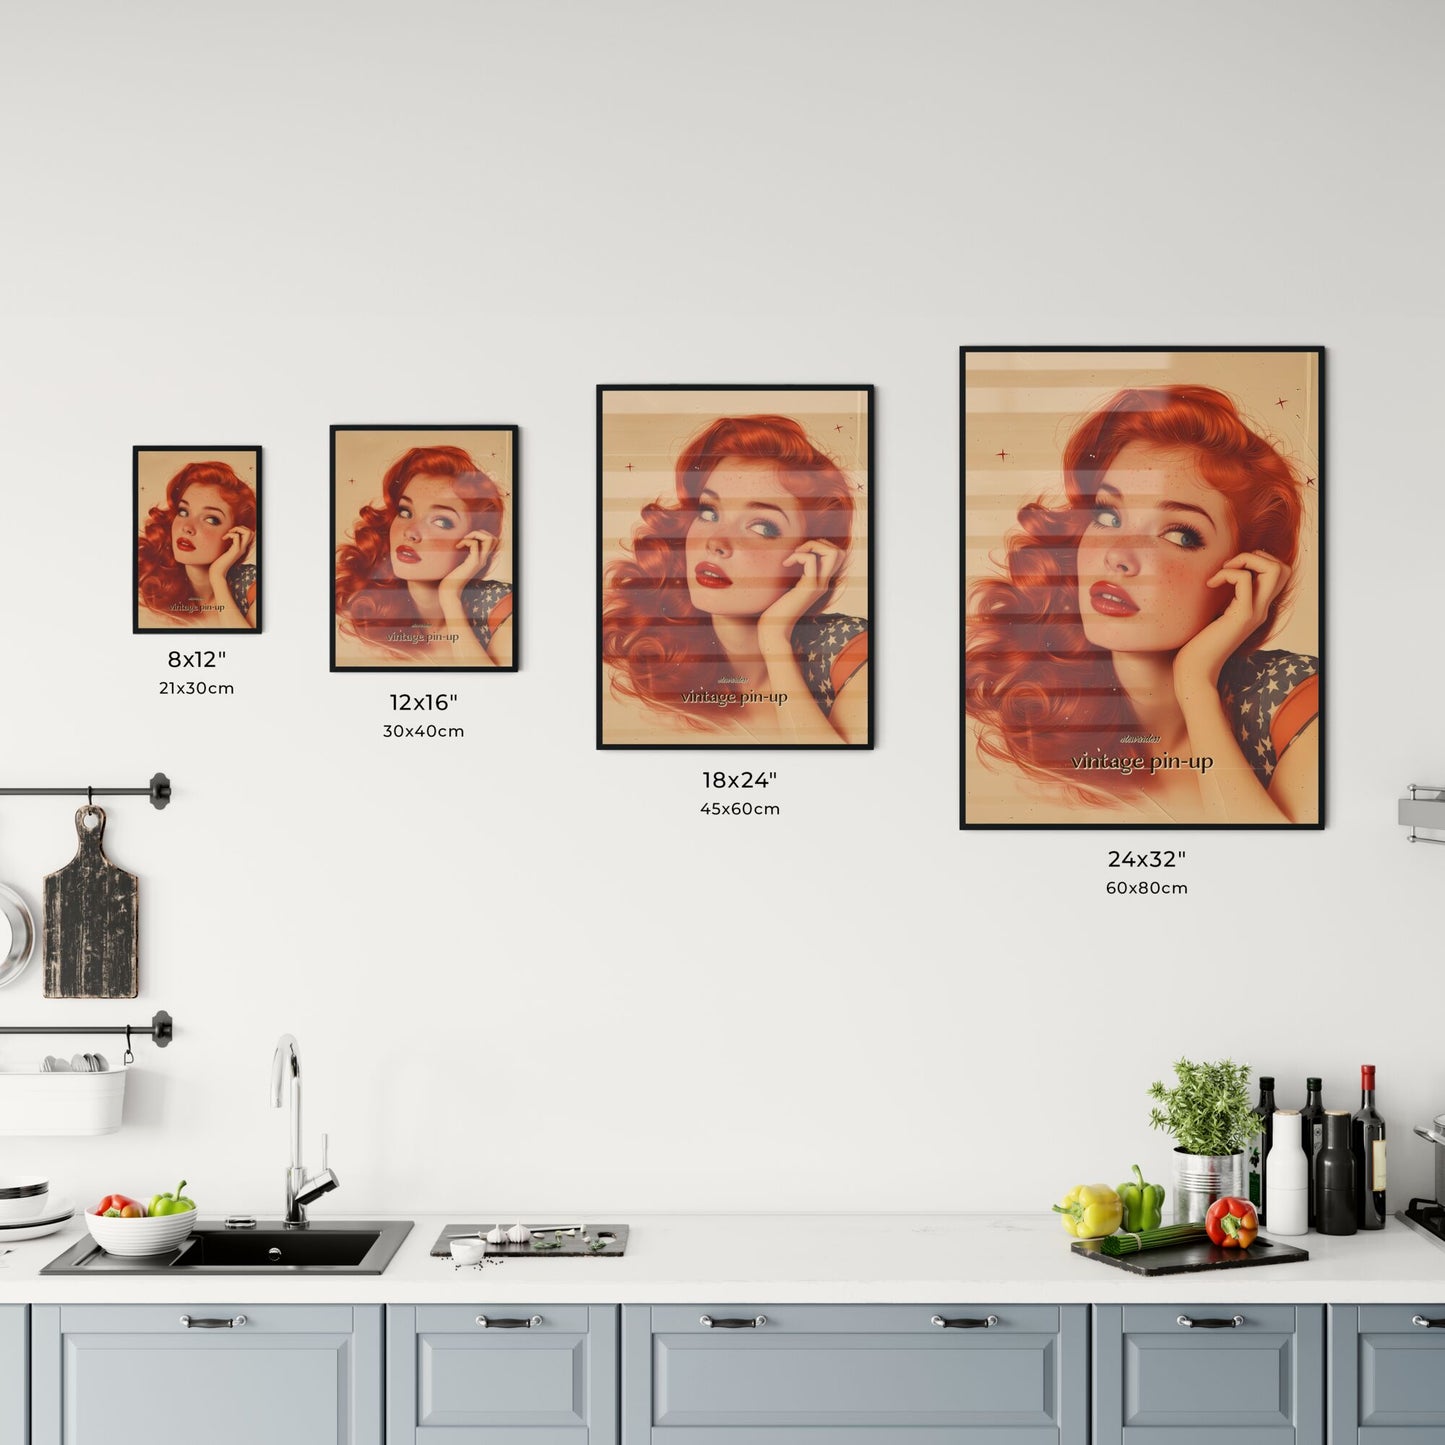 stewardess, vintage pin-up, A Poster of a woman with red hair and freckles Default Title